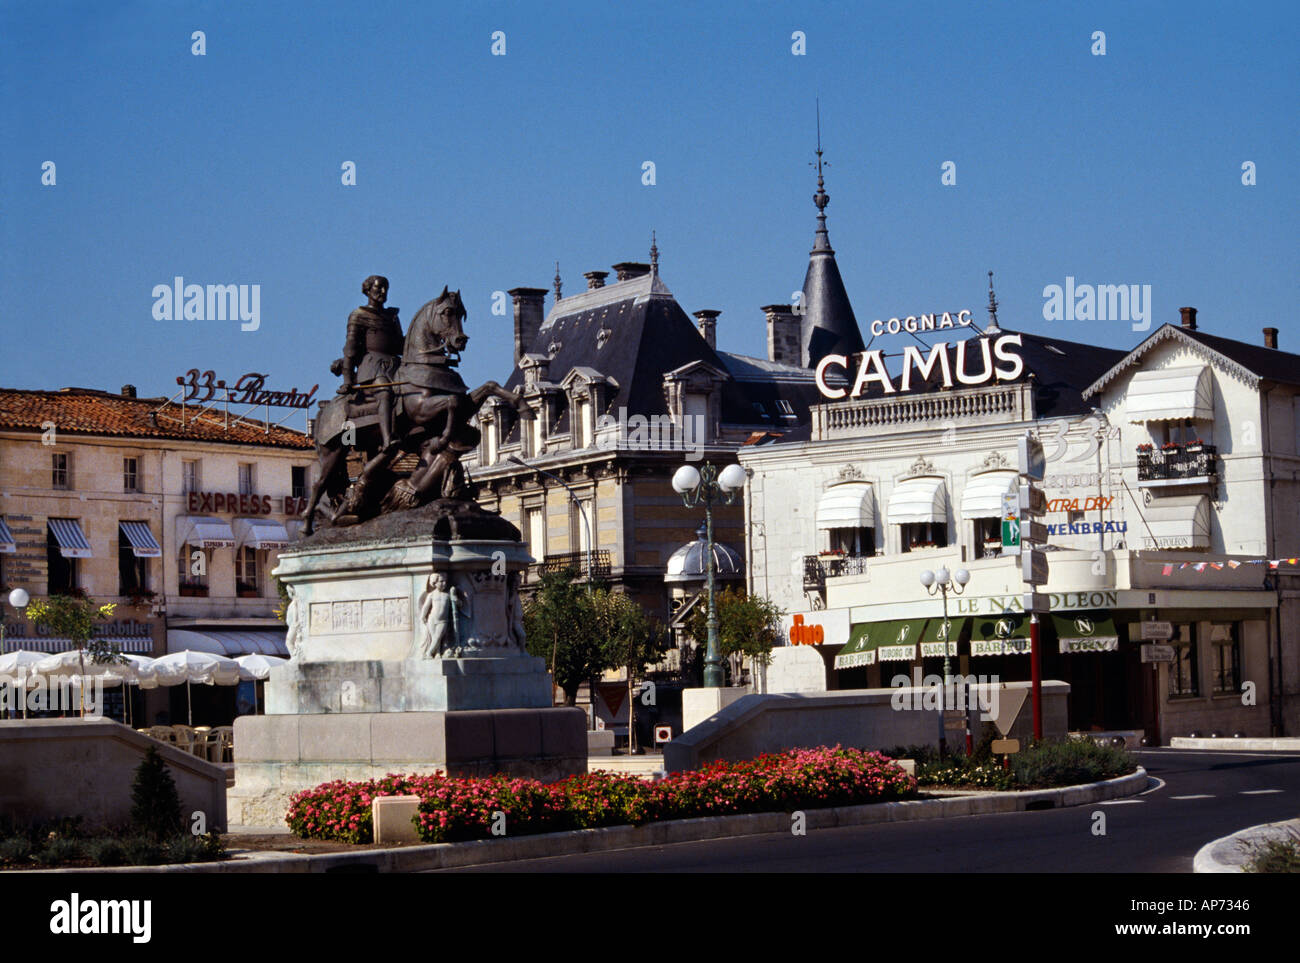 Place Francois I the main square in Cognac Charente France Stock Photo